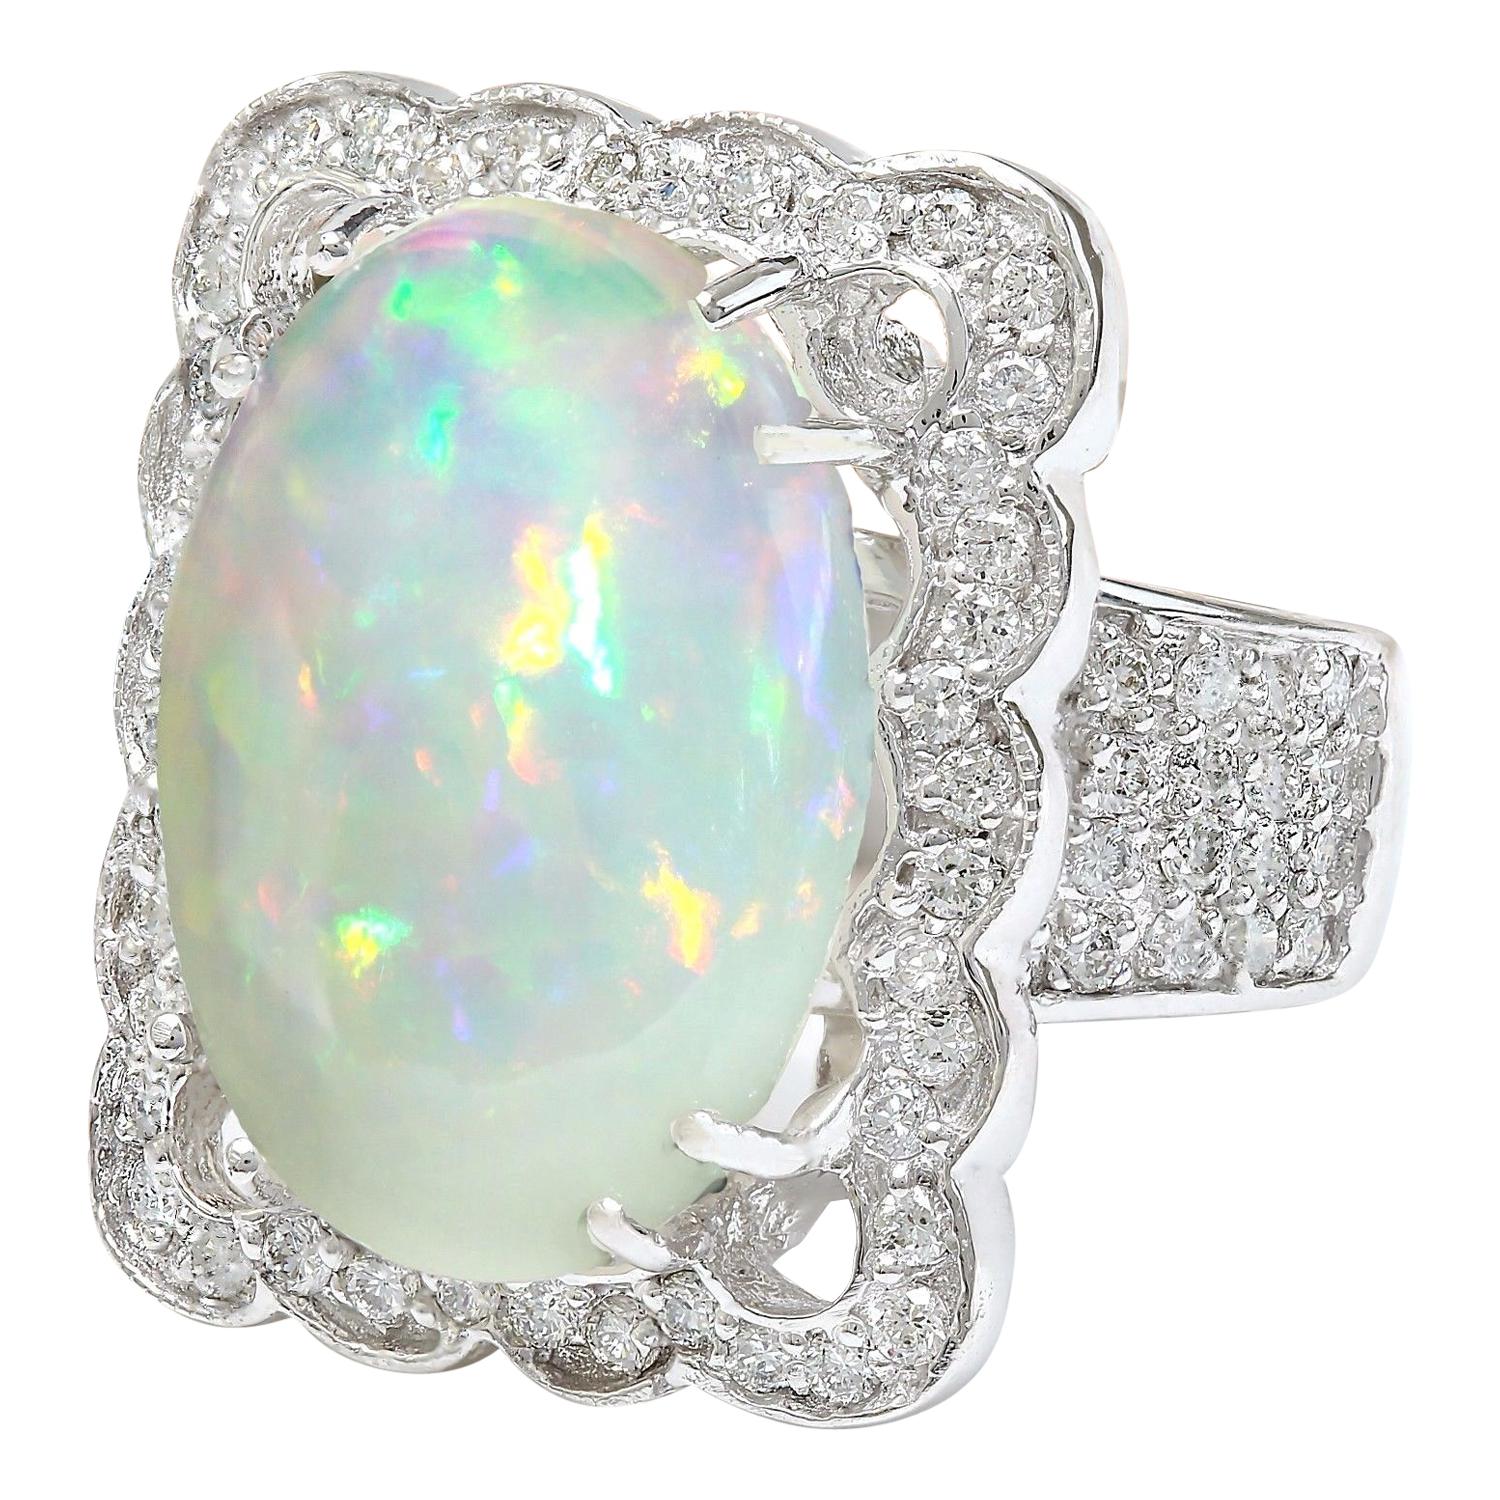 13.10 Carat  Opal 18K Solid White Gold Diamond Ring
Item Type: Ring
Item Style: Cocktail
Material: 18K White Gold
Mainstone: Opal
Stone Color: Multicolor
Stone Weight: 11.10 Carat
Stone Shape: Oval
Stone Quantity: 1
Stone Dimensions: 22.20x16.30